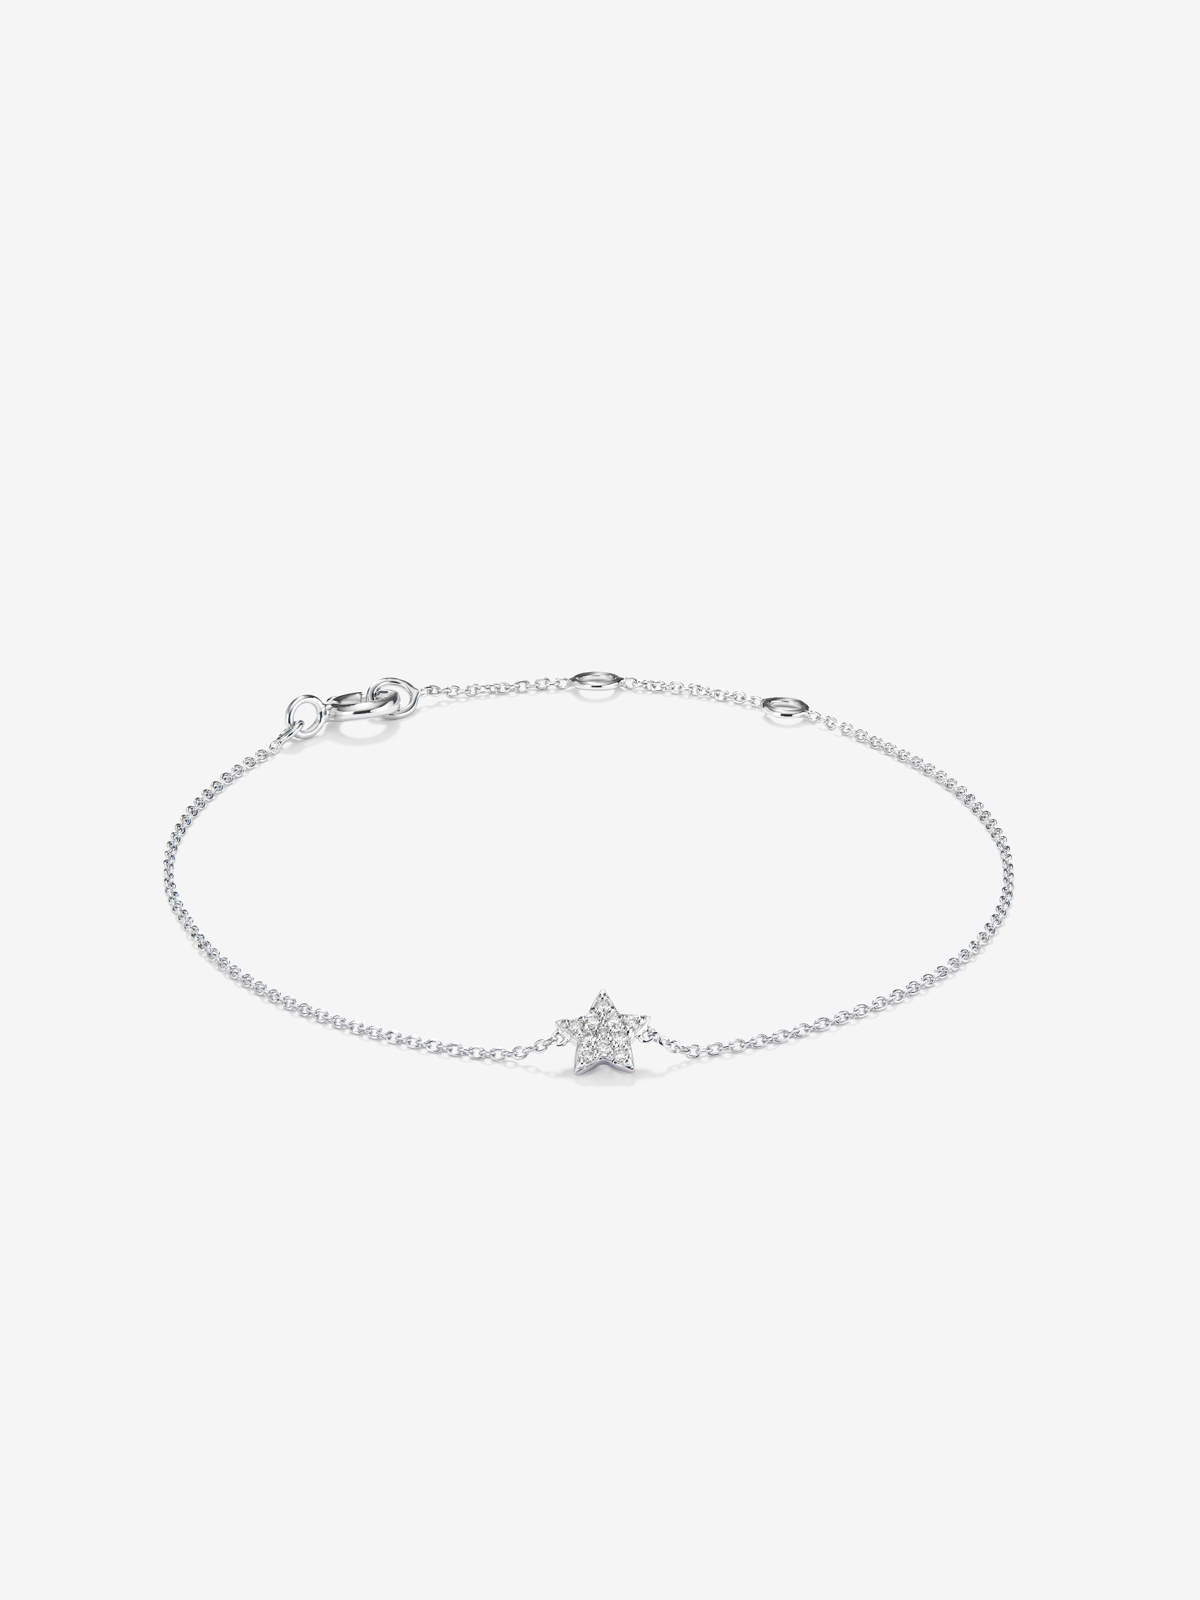 18K white gold bracelet with white diamonds of 0.05 CTS star -shaped 0.05